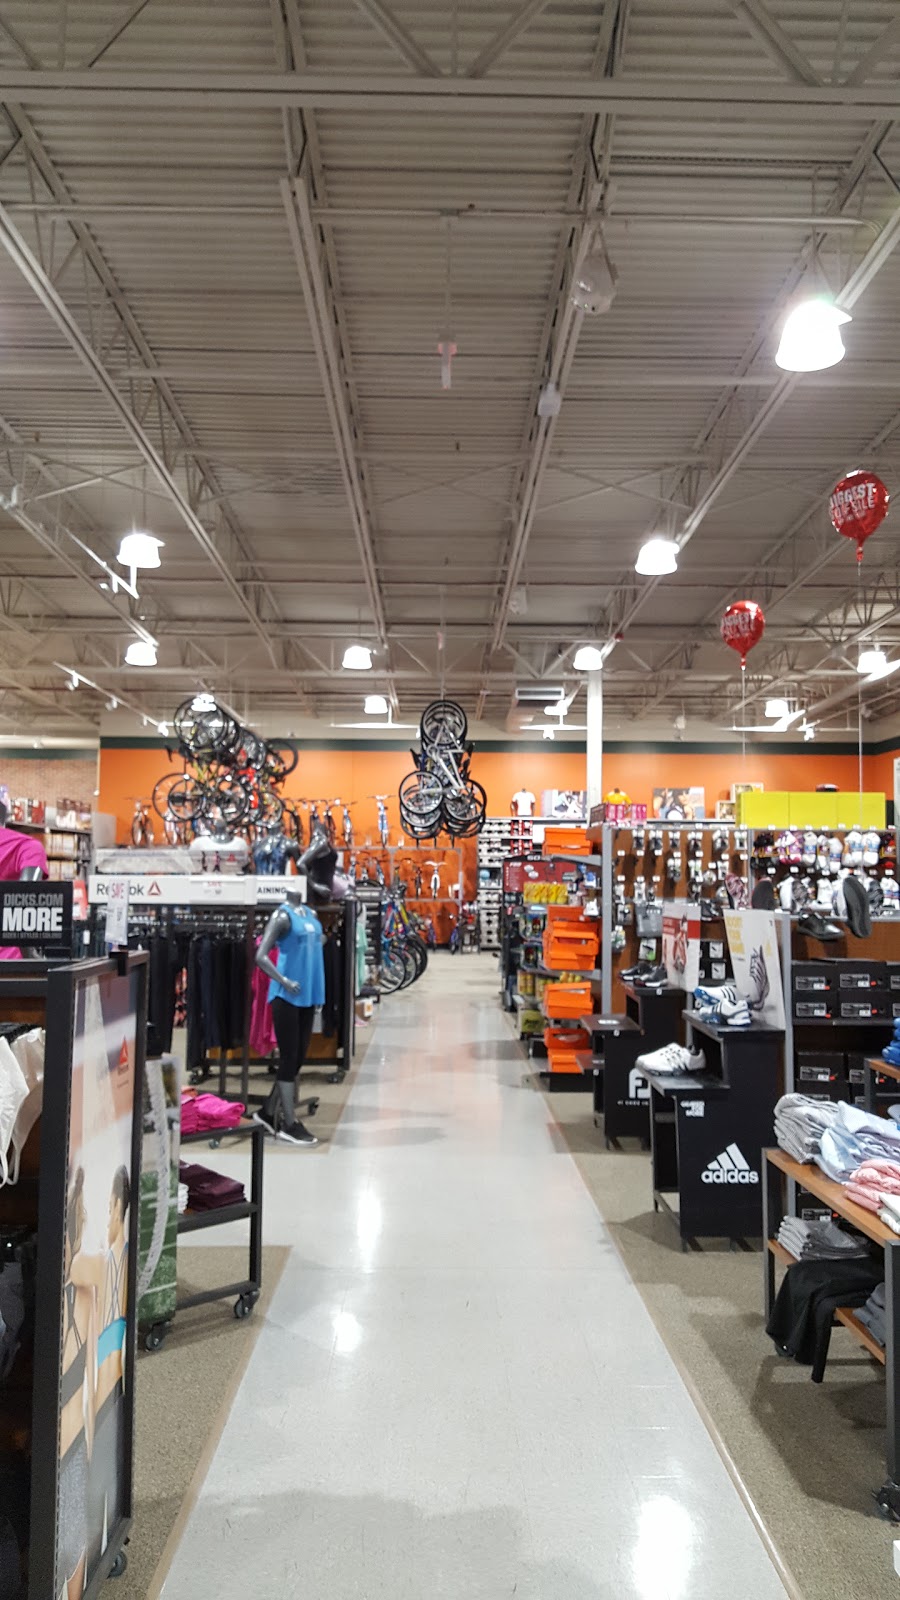 DICKS Sporting Goods | 411 Universal Dr N, North Haven, CT 06473 | Phone: (203) 836-2860